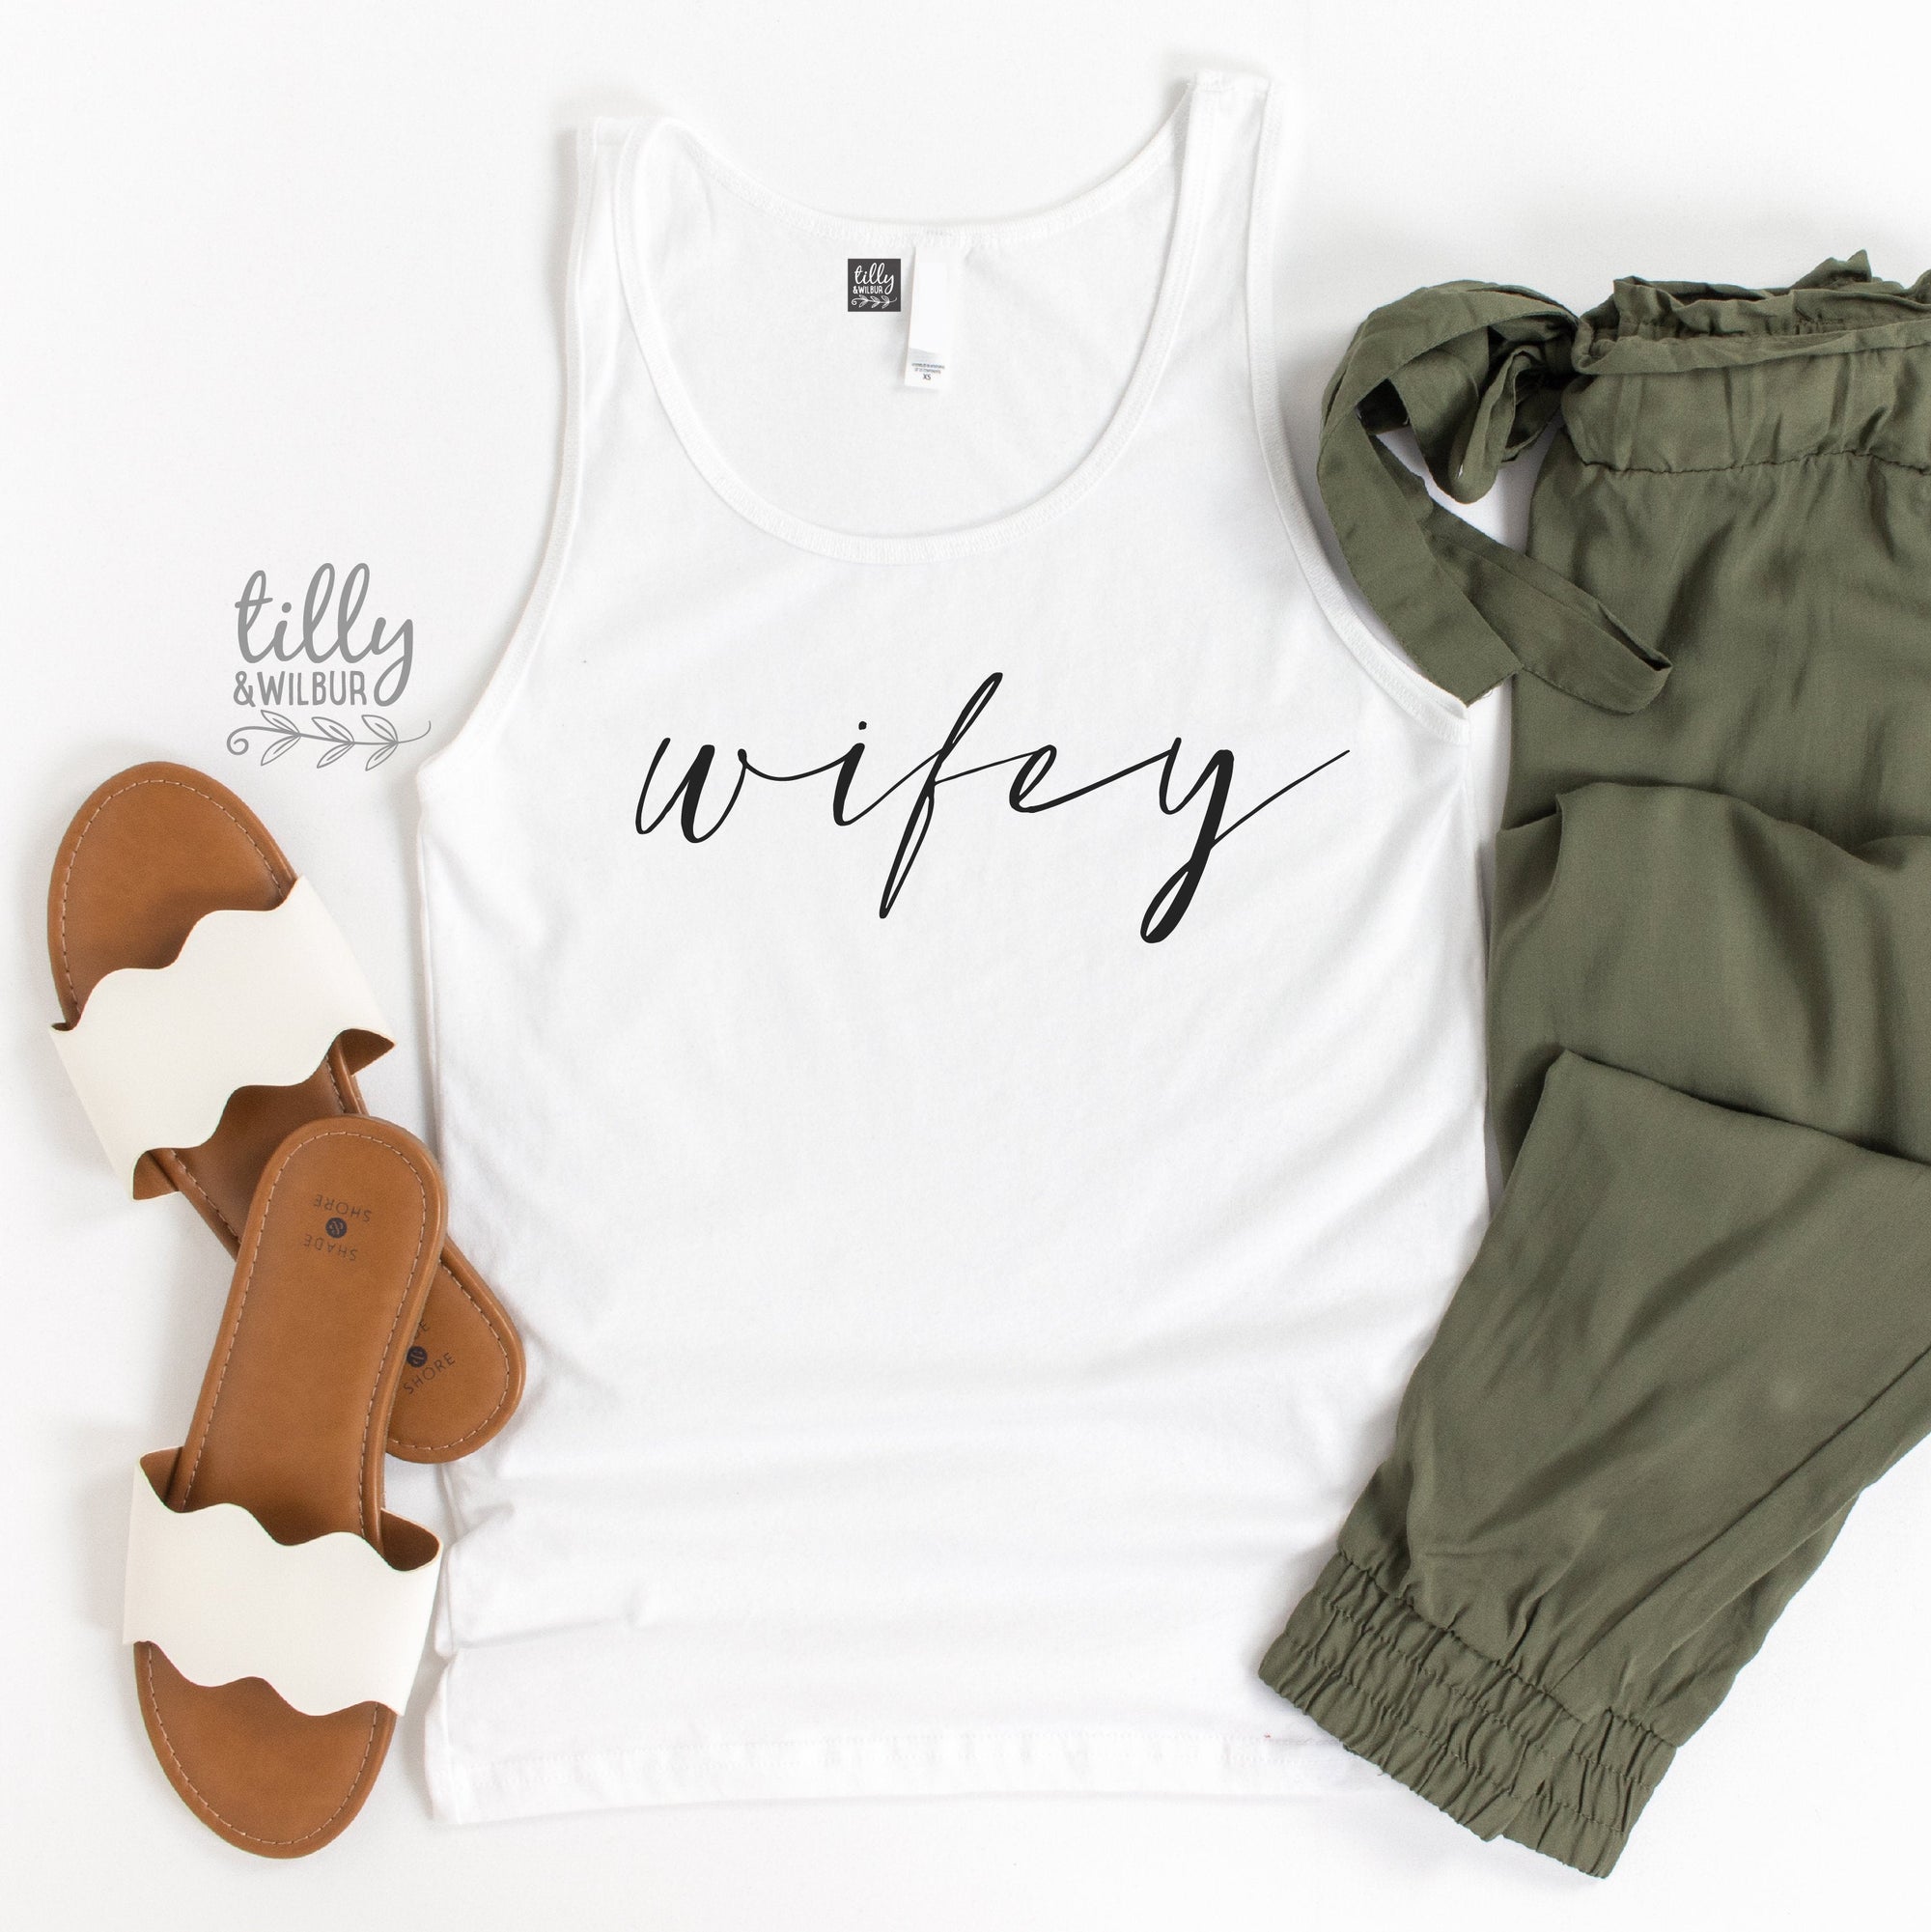 Wifey Singlet For New Bride, Wifey Tee, Newlyweds, Mr and Mrs Matchy Matchy Shirts, Honeymoon Outfits, Wedding Gift, His and Hers Clothing,